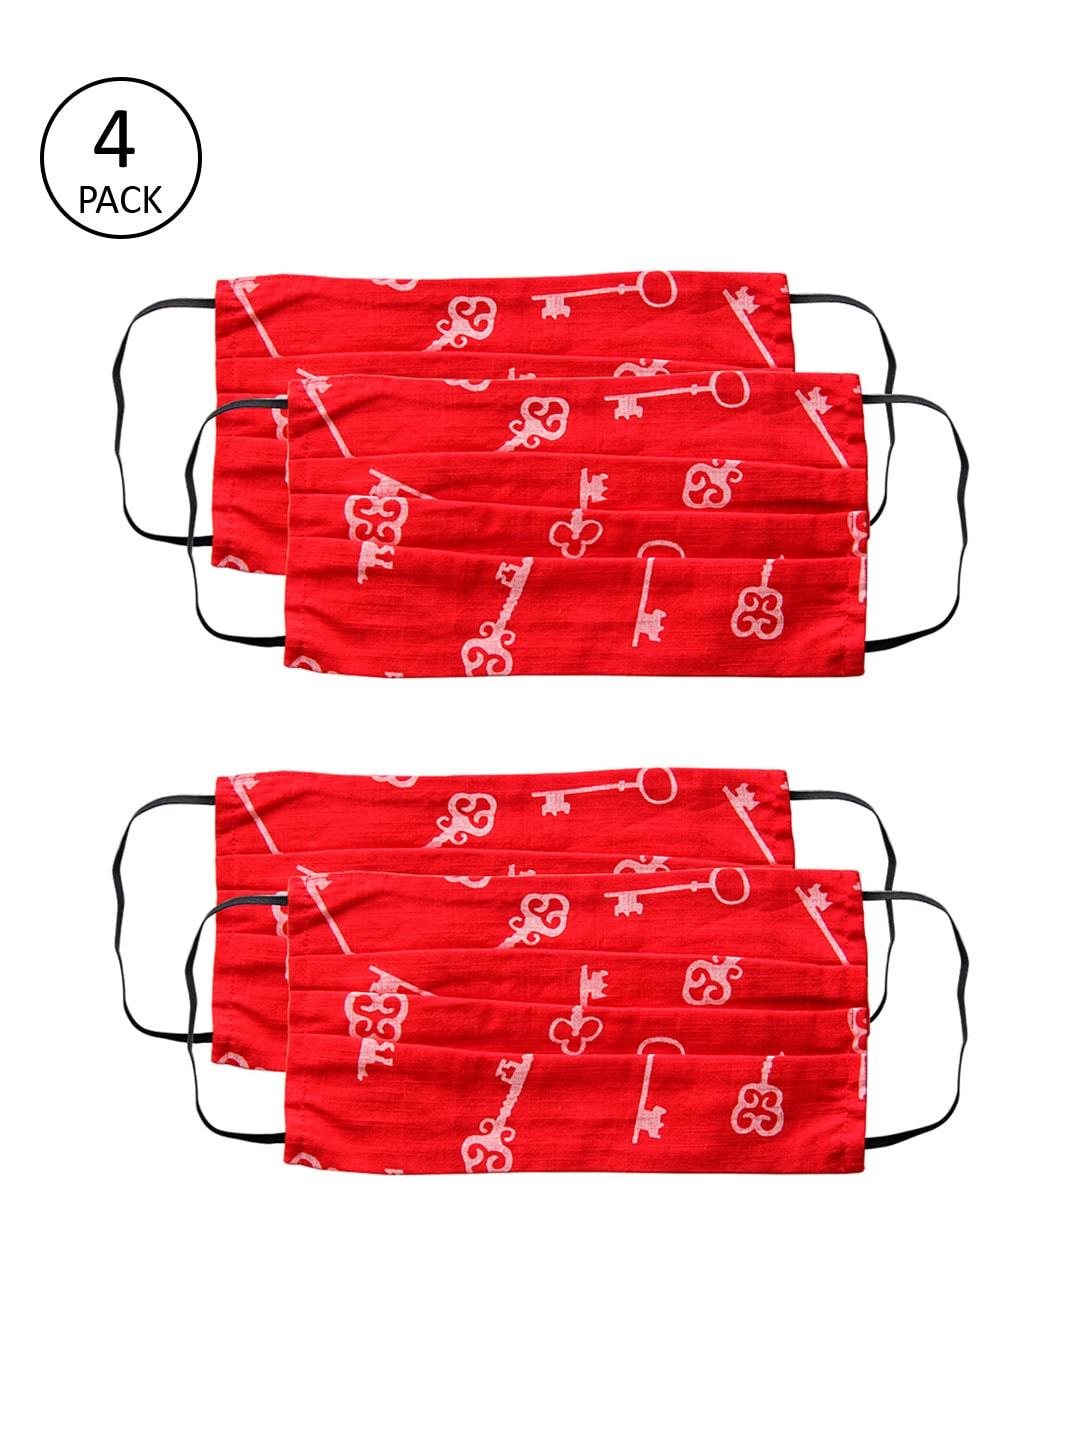 Voylla Unisex Red & White Printed 4 Pcs 2 Ply Reusable Outdoor Fabric Masks